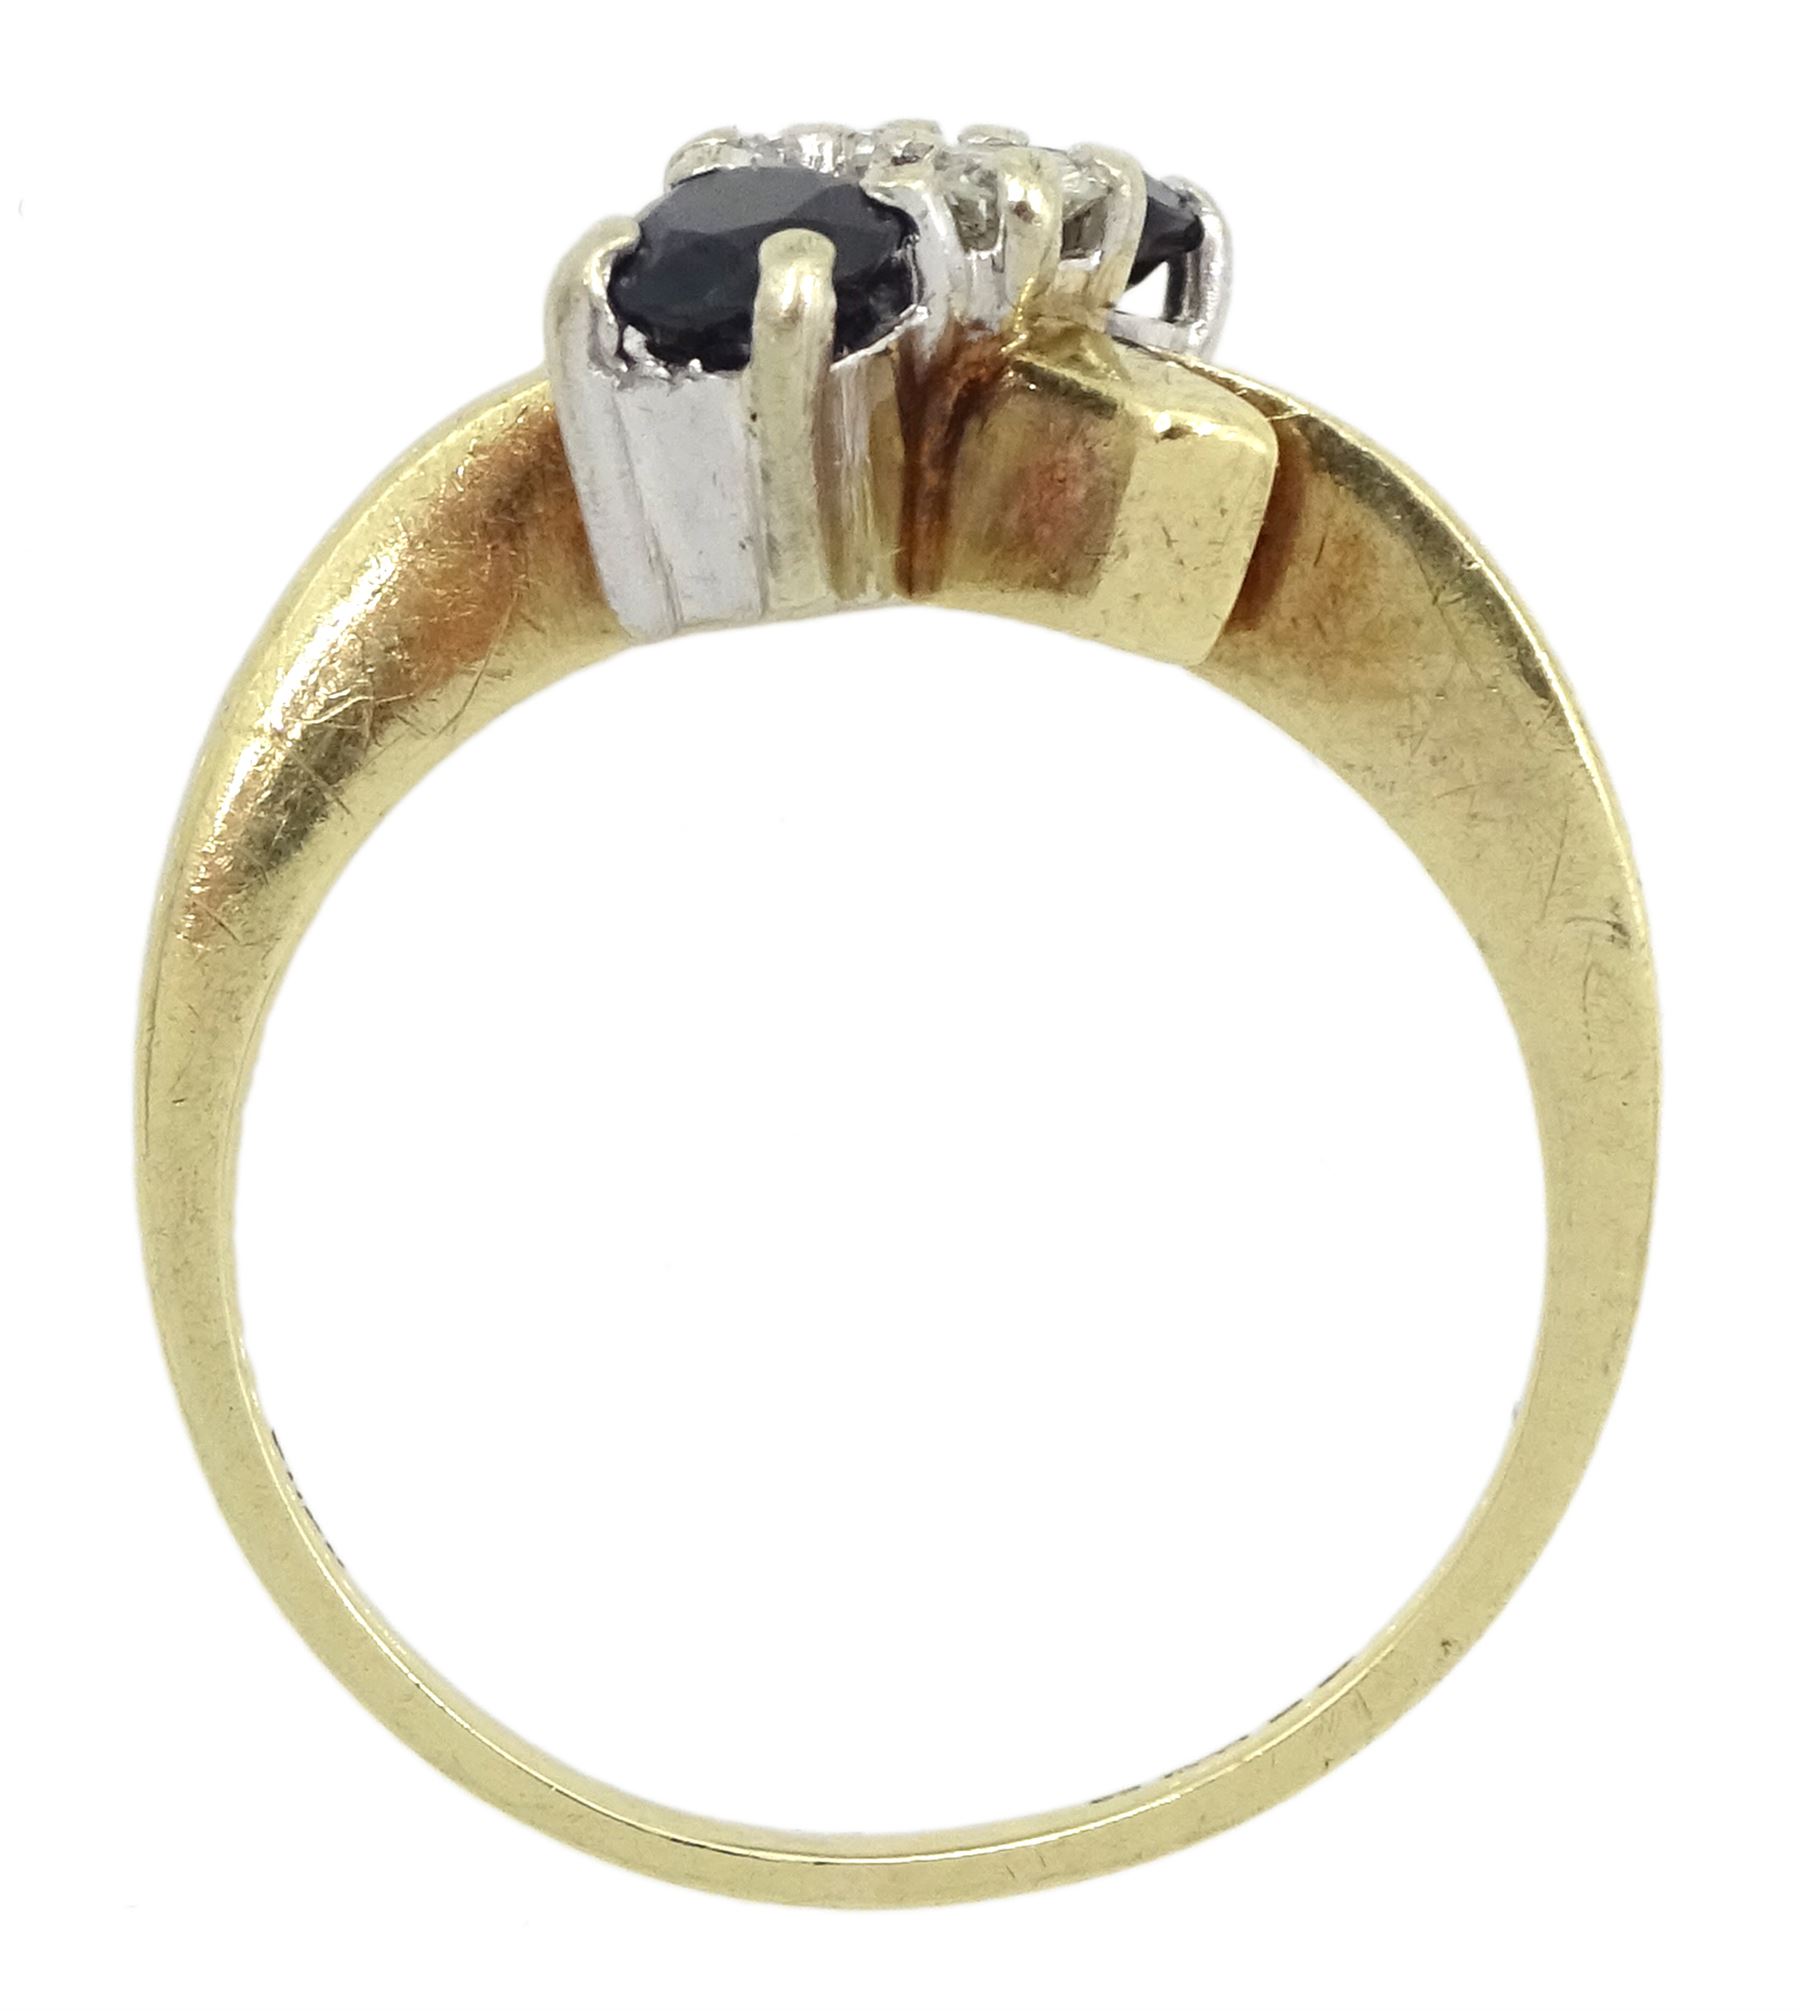 Gold four stone round brilliant cut diamond and sapphire ring - Image 4 of 4